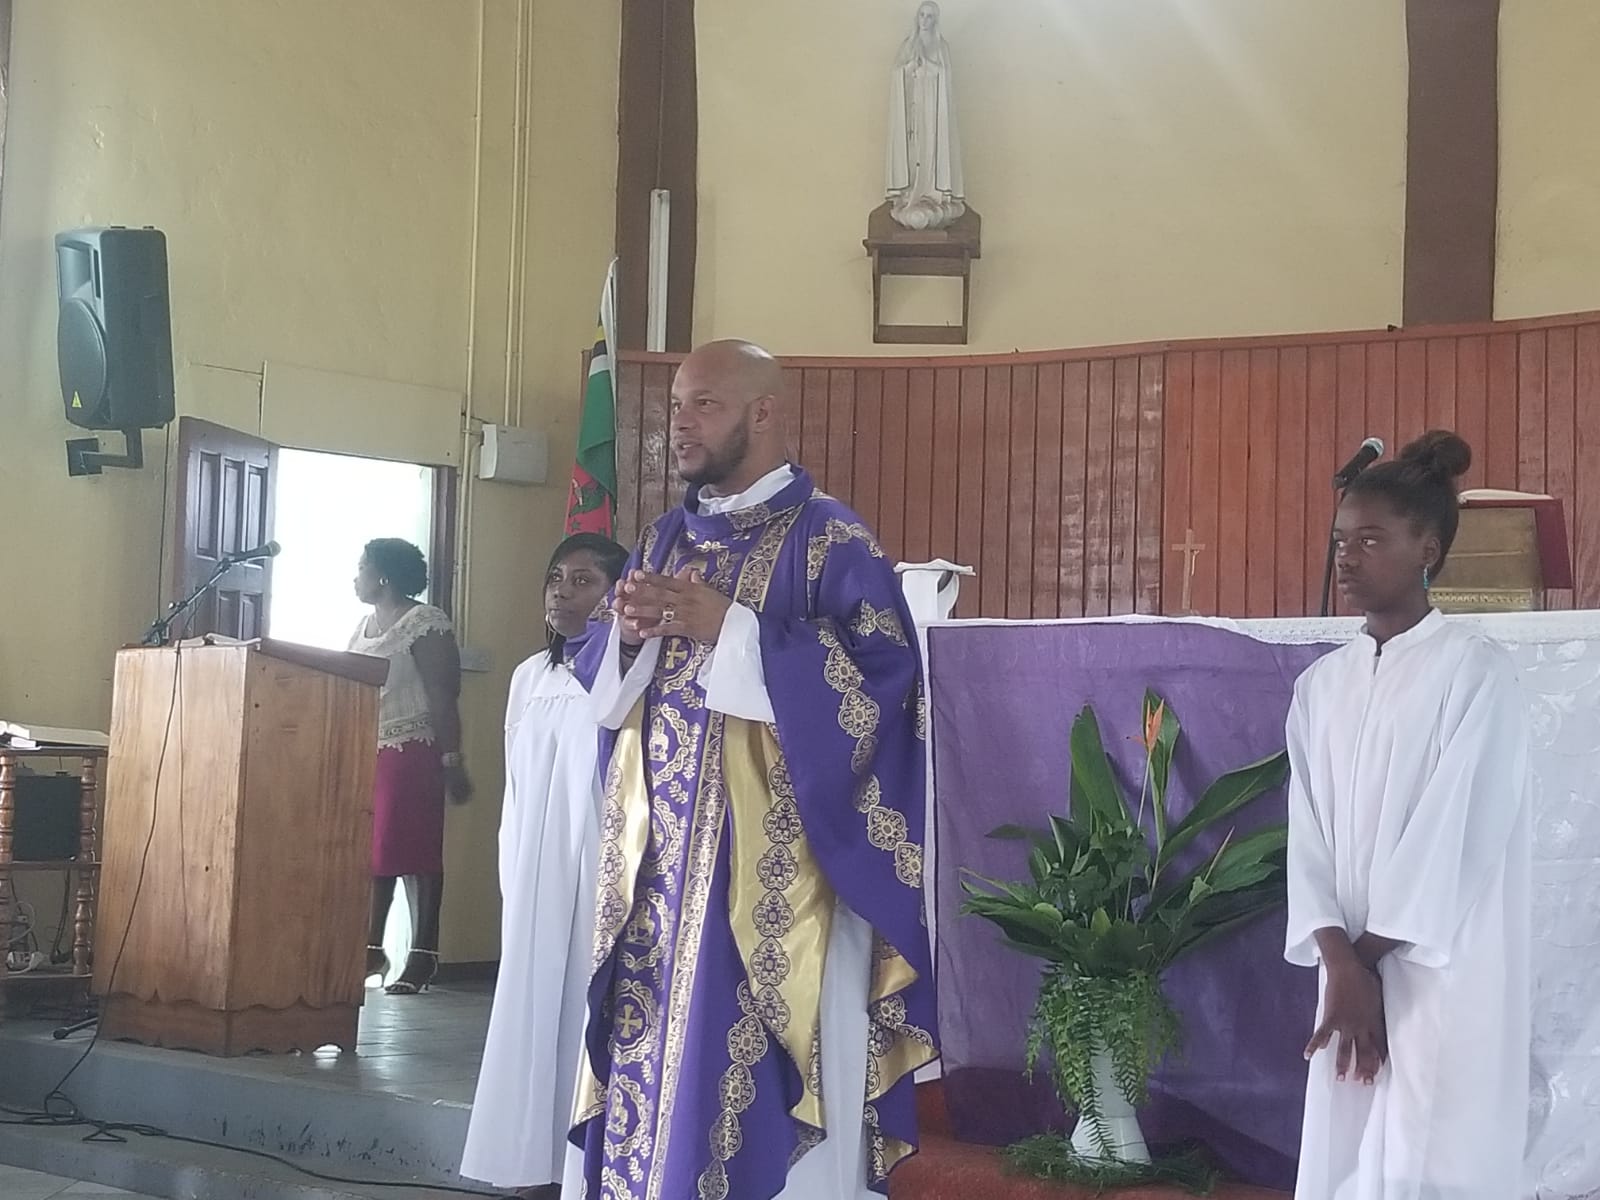 Father Elton J. Letang Celebrated Mass For The First Time In Paix-Bouche